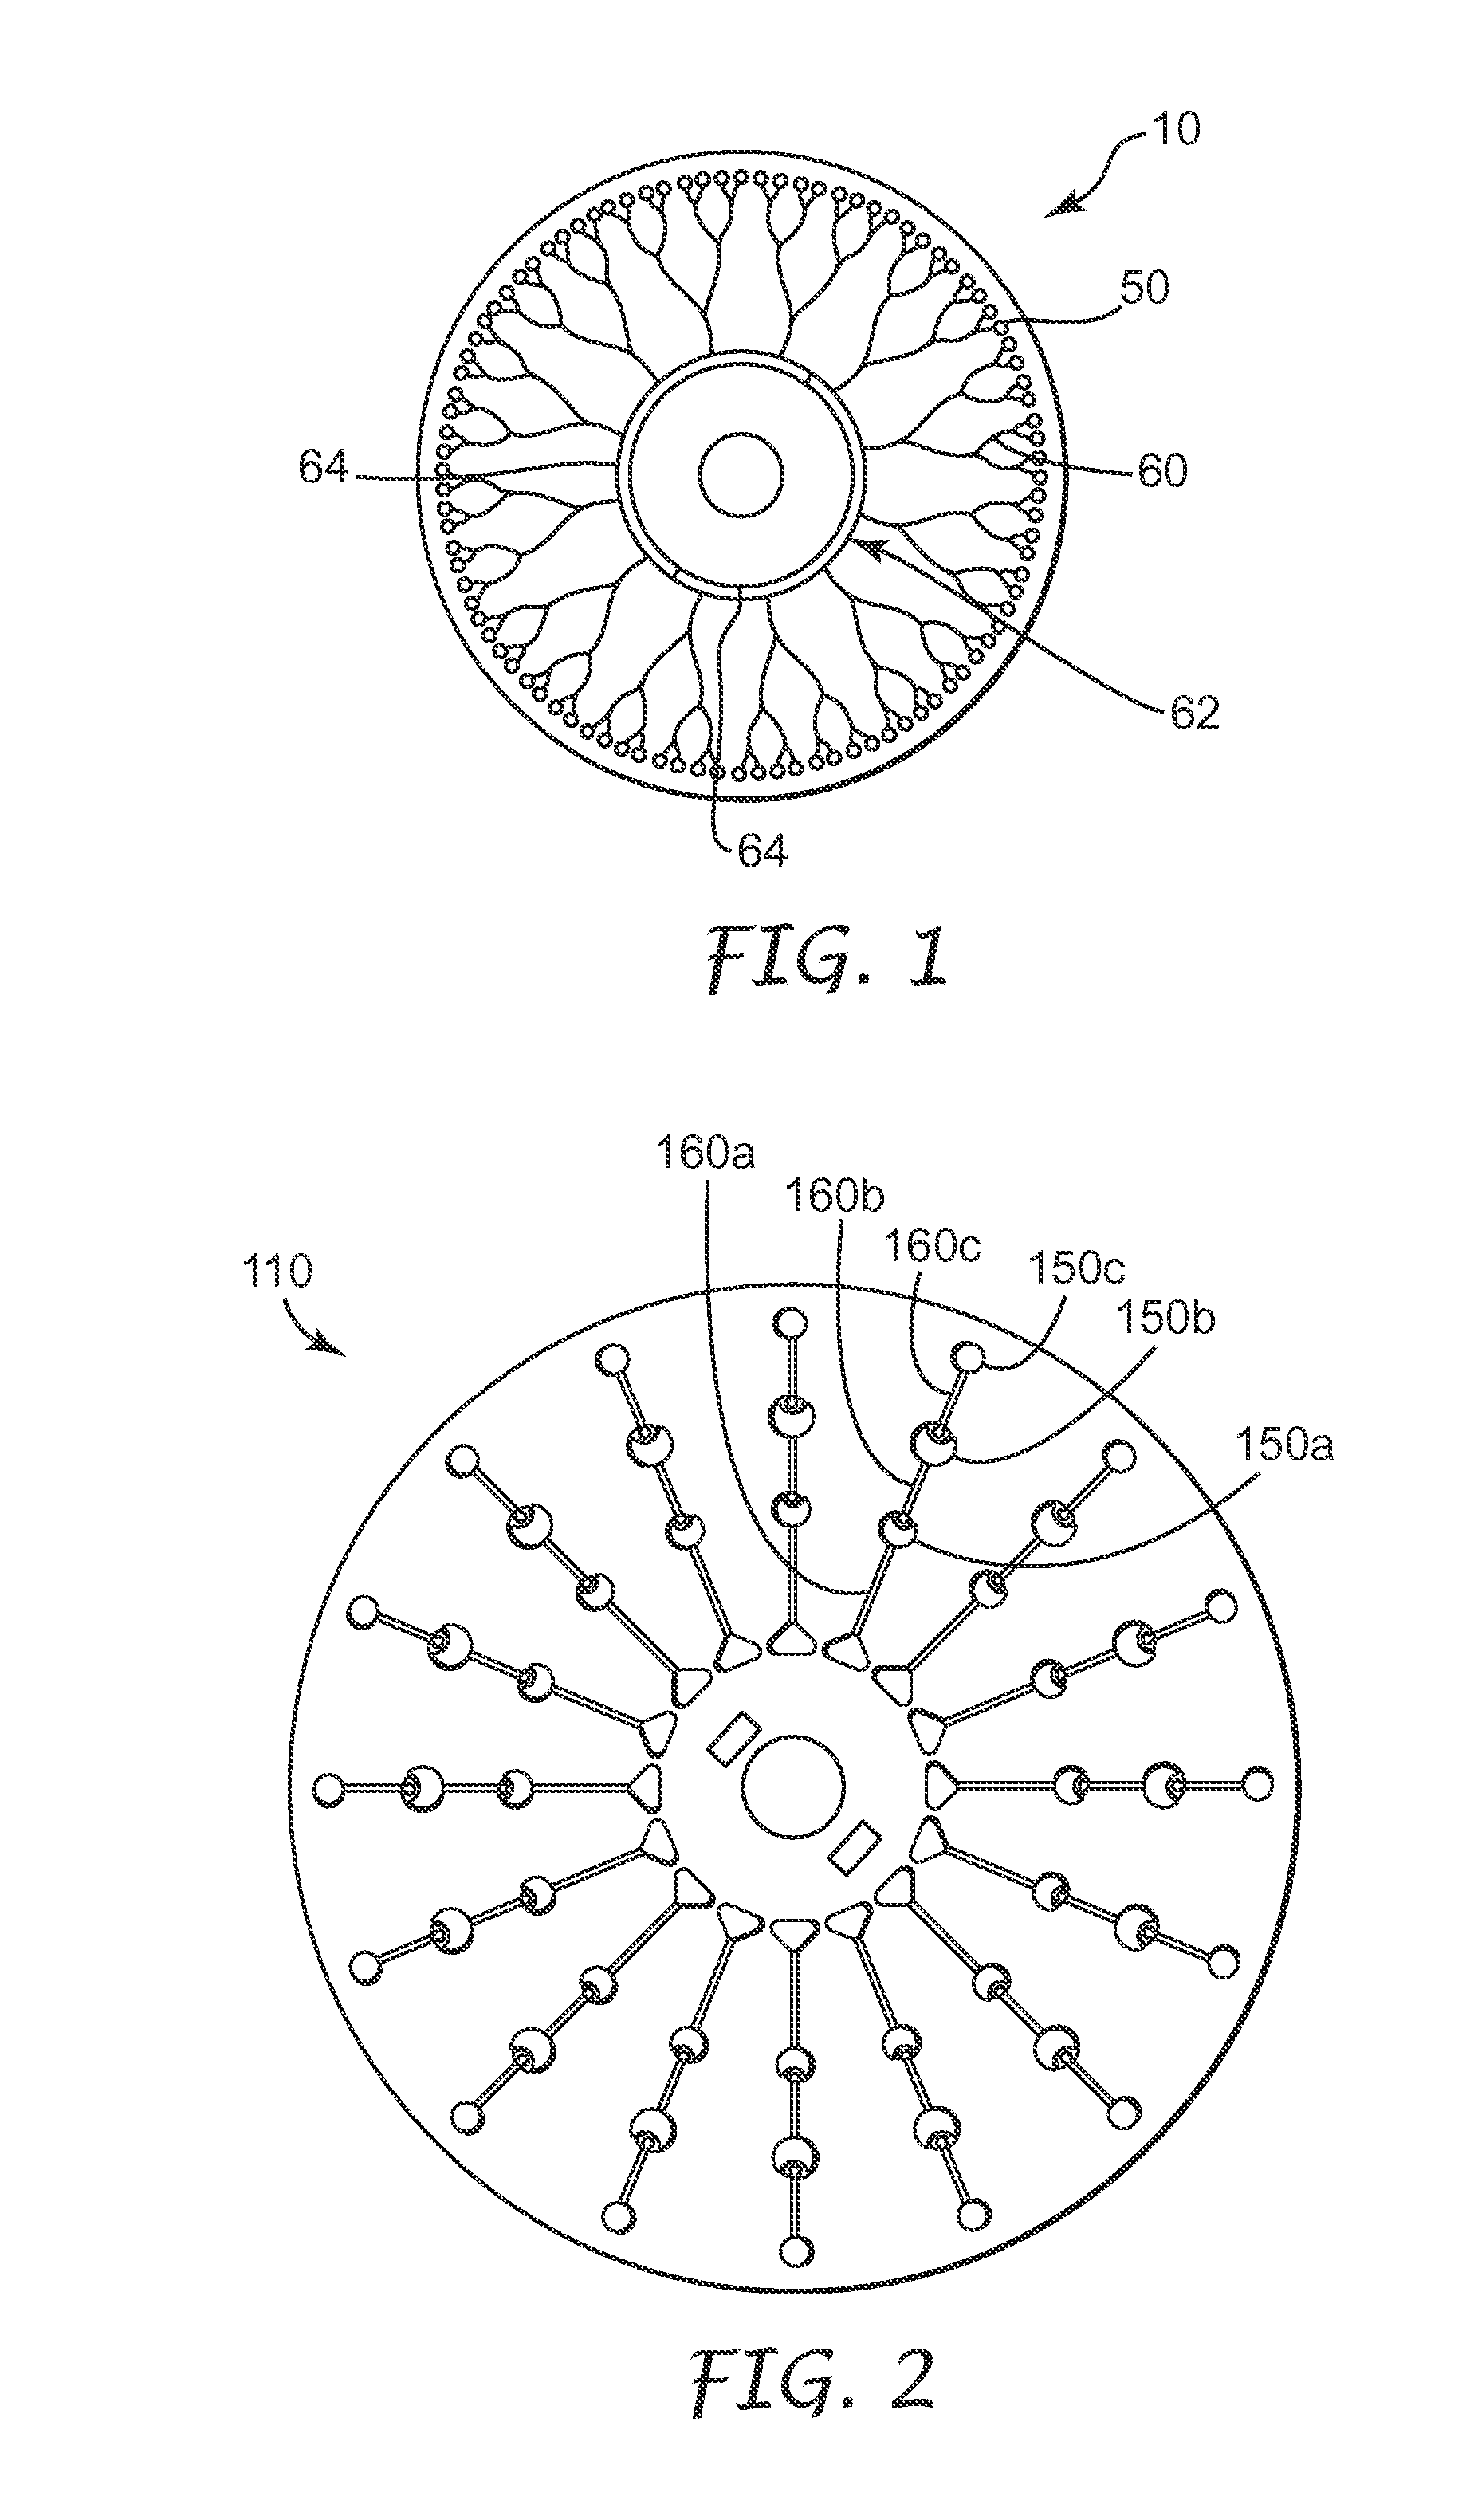 Methods and devices for removal of organic molecules from biological mixtures using a hydrophilic solid support in a hydrophobic matrix